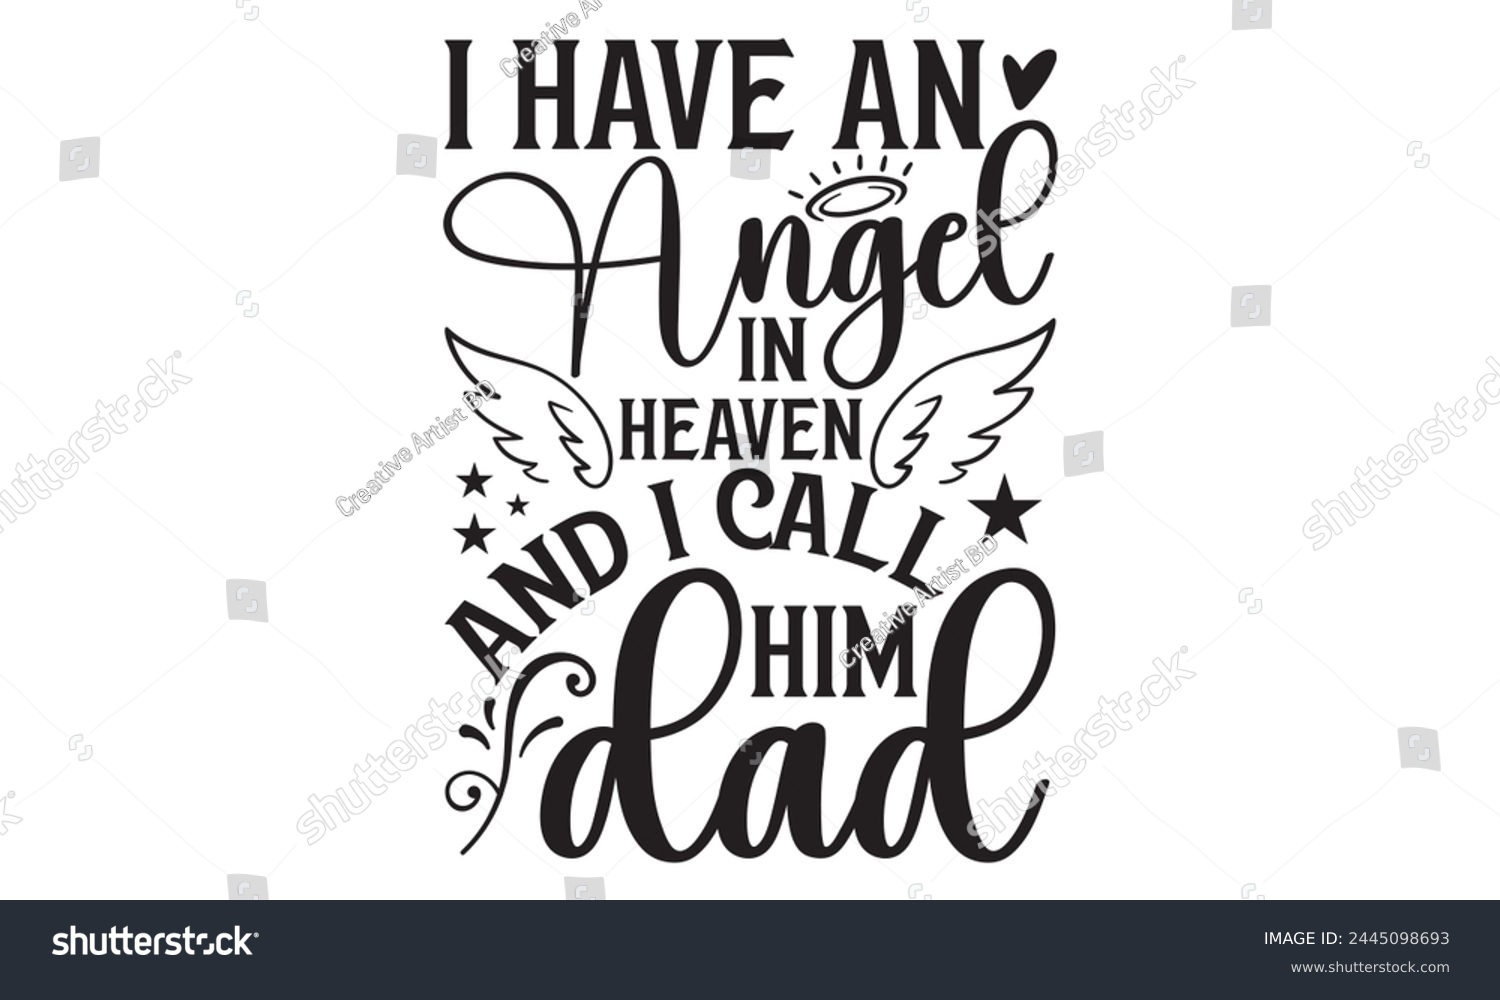 SVG of I Have An Angel In Heaven And I Call Him Dad - Memorial T shirt Design, Handmade calligraphy vector illustration, Typography Vector for poster, banner, flyer and mug. svg